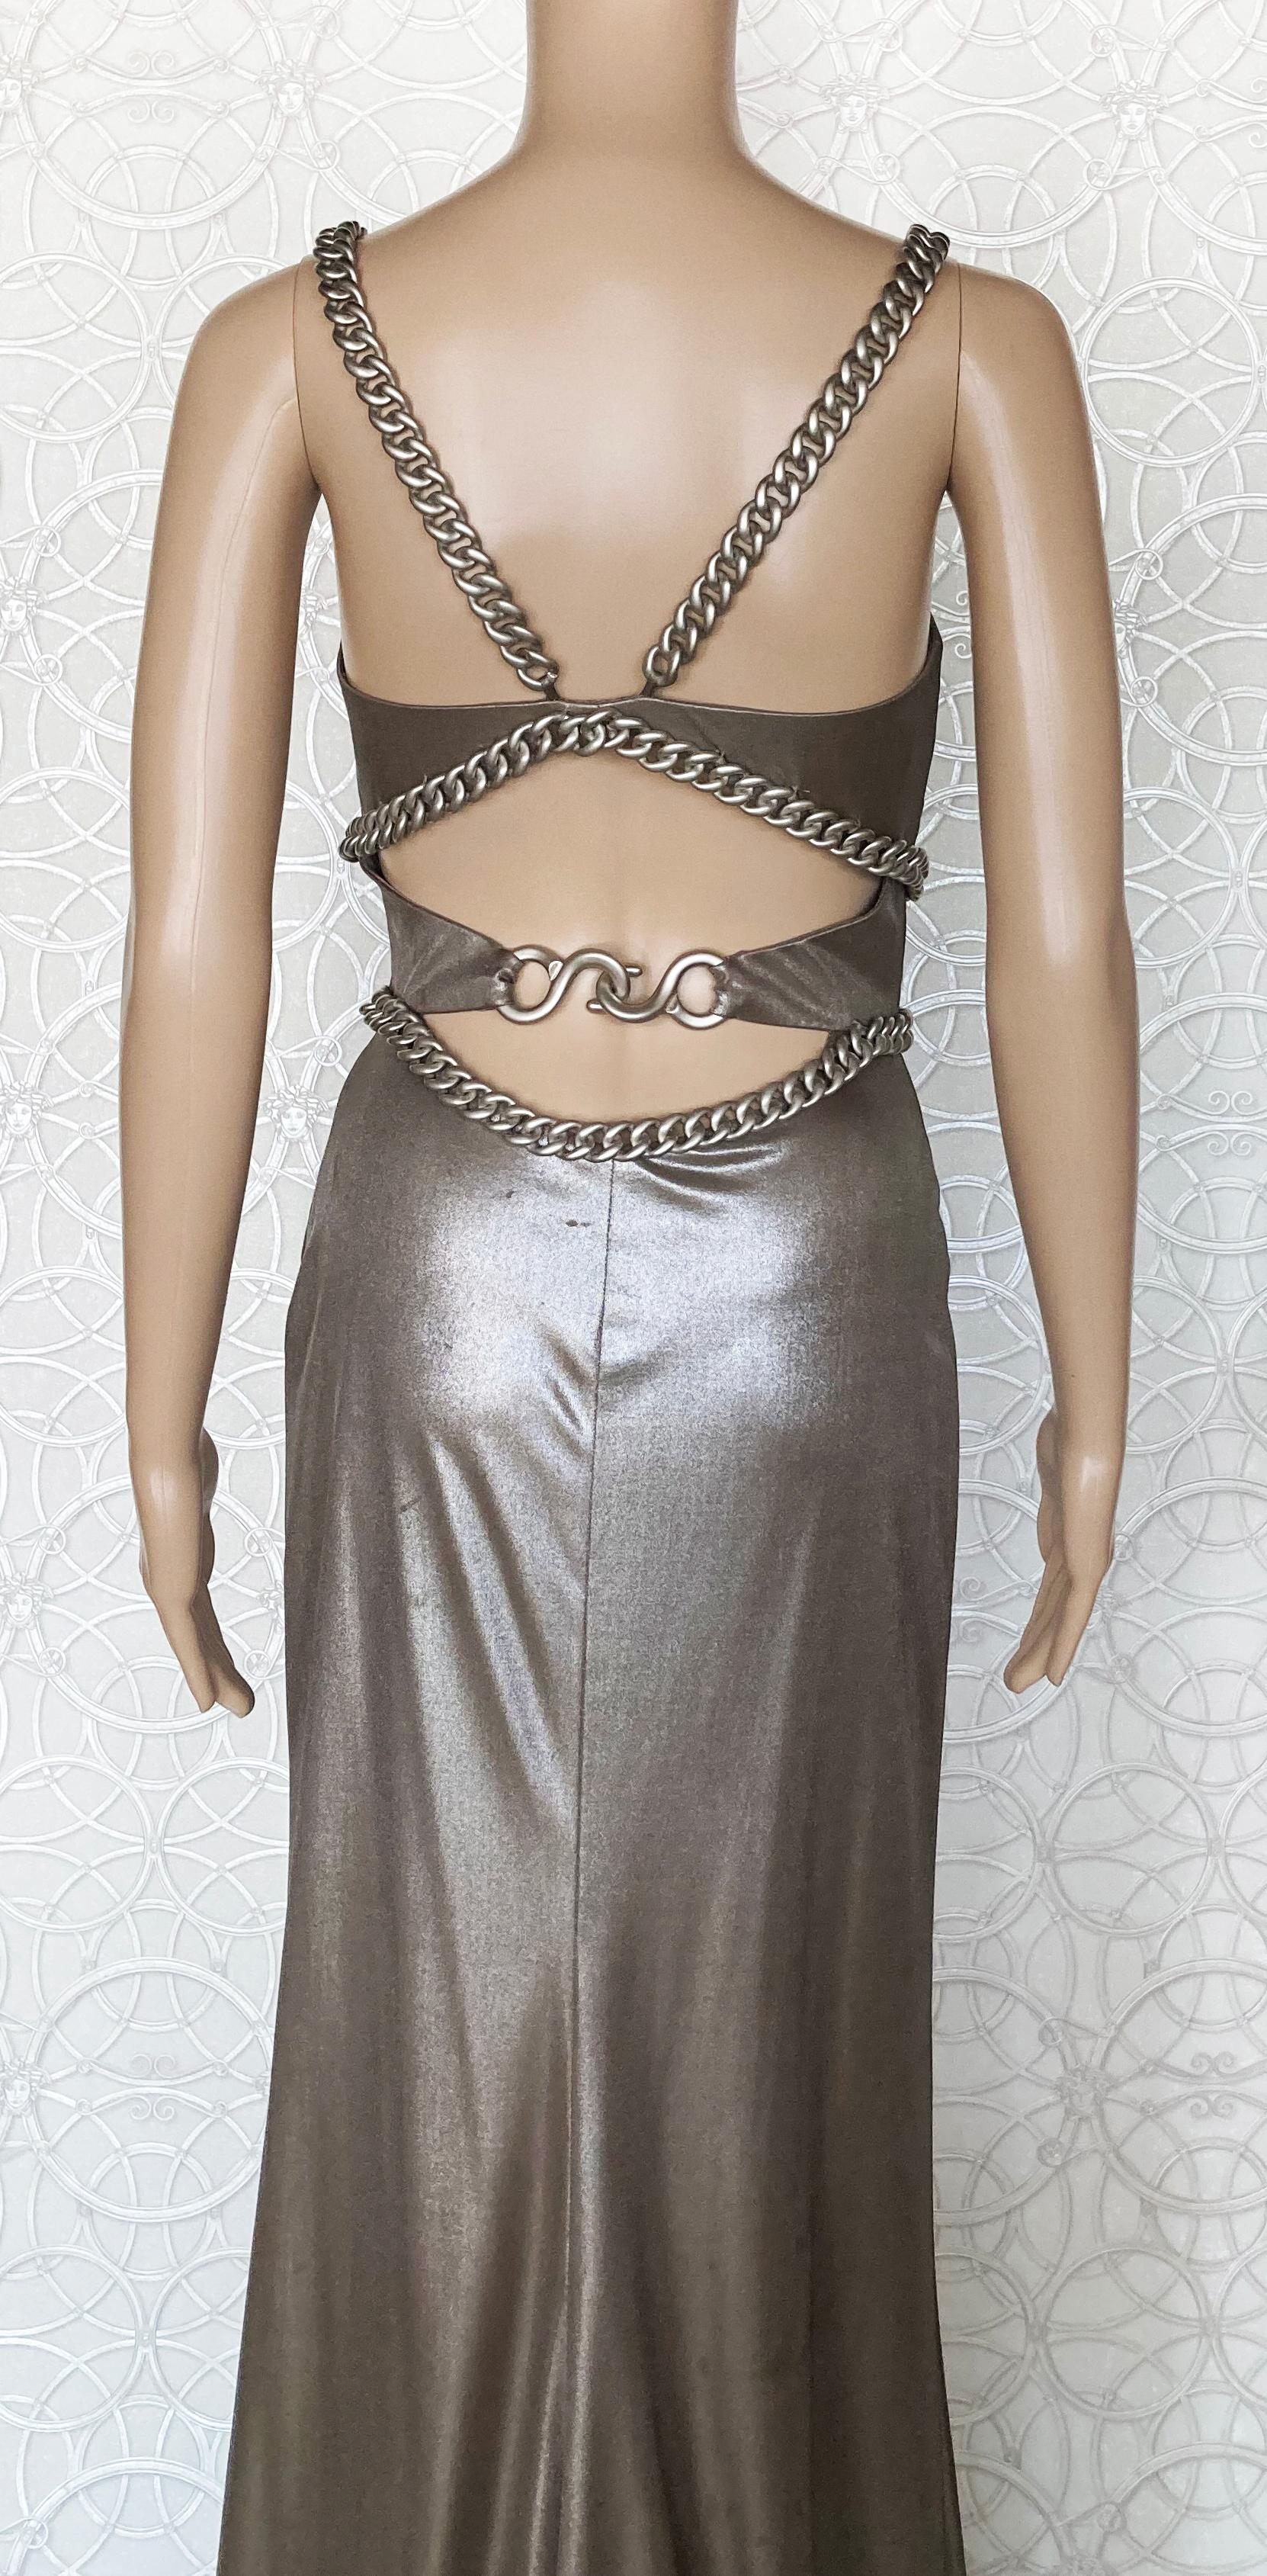 F/W 2005 Look # 45 NEW VERSACE CHAIN EMBELLISHED LONG LAME DRESS 40 - 4 5